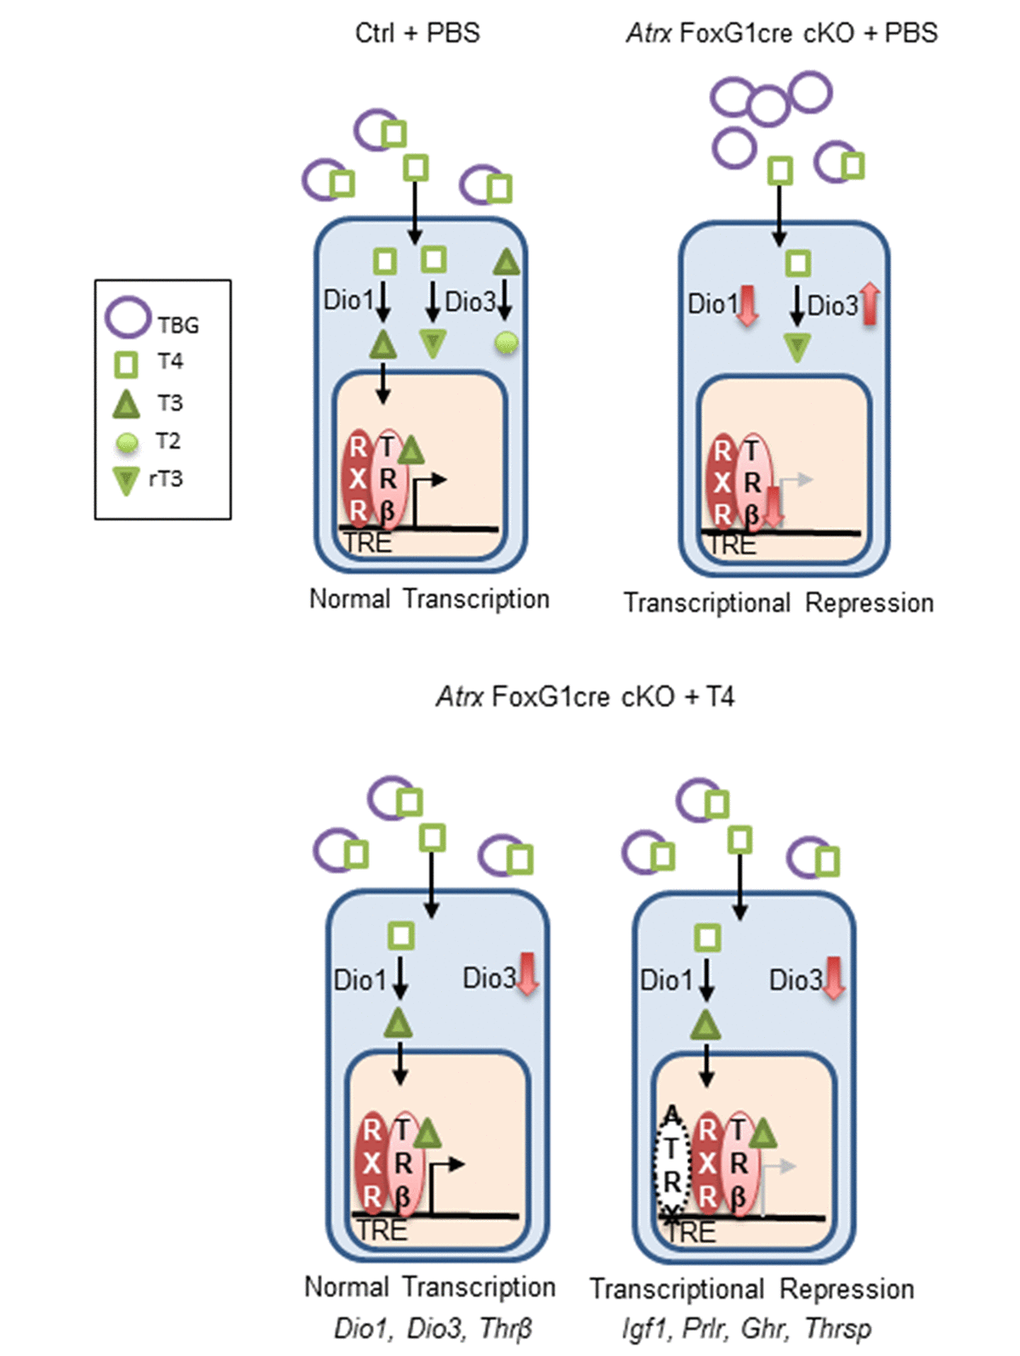 ATRX is required for the transcription of several thyroid hormone responsive genes in the liver. In the control, T4 is bound to thyroxine binding globulin (TBG) in the blood. It is converted to T3 in the liver by Dio1. Both T4 and T3 can be inactivated by Dio3 to produce the inactive molecules T2 and rT3. T3 binds its receptor Thrβ (found as a heterodimer with retinoid x receptor), which enters the nucleus, binds a thyroid hormone responsive element and initiates transcription. In Atrx Foxg1cre mice there is an increase in TBG and a decrease in T4 in the serum. In the liver, there is a decrease in Dio1 and an increase in Dio3. Any T4 present is likely converted to rT3. Low levels of Thrβ acts as a transcriptional repressor. Following treatment with T4 in Atrx Foxg1cre mice, there are control levels of TBG and T4 in the blood. In the liver, Dio1 is at control levels and Dio3 is repressed. T4 is converted to T3 where it binds its receptor and transcription occurs normally. This occurs for a subset of genes (Dio1, Dio3 and Thrβ). However, some genes (Igf1, Prlr, Ghr and Thrsp) are still transcriptionally repressed following T4 treatment. This suggests that ATRX is required for the transcription of some thyroid hormone responsive genes.